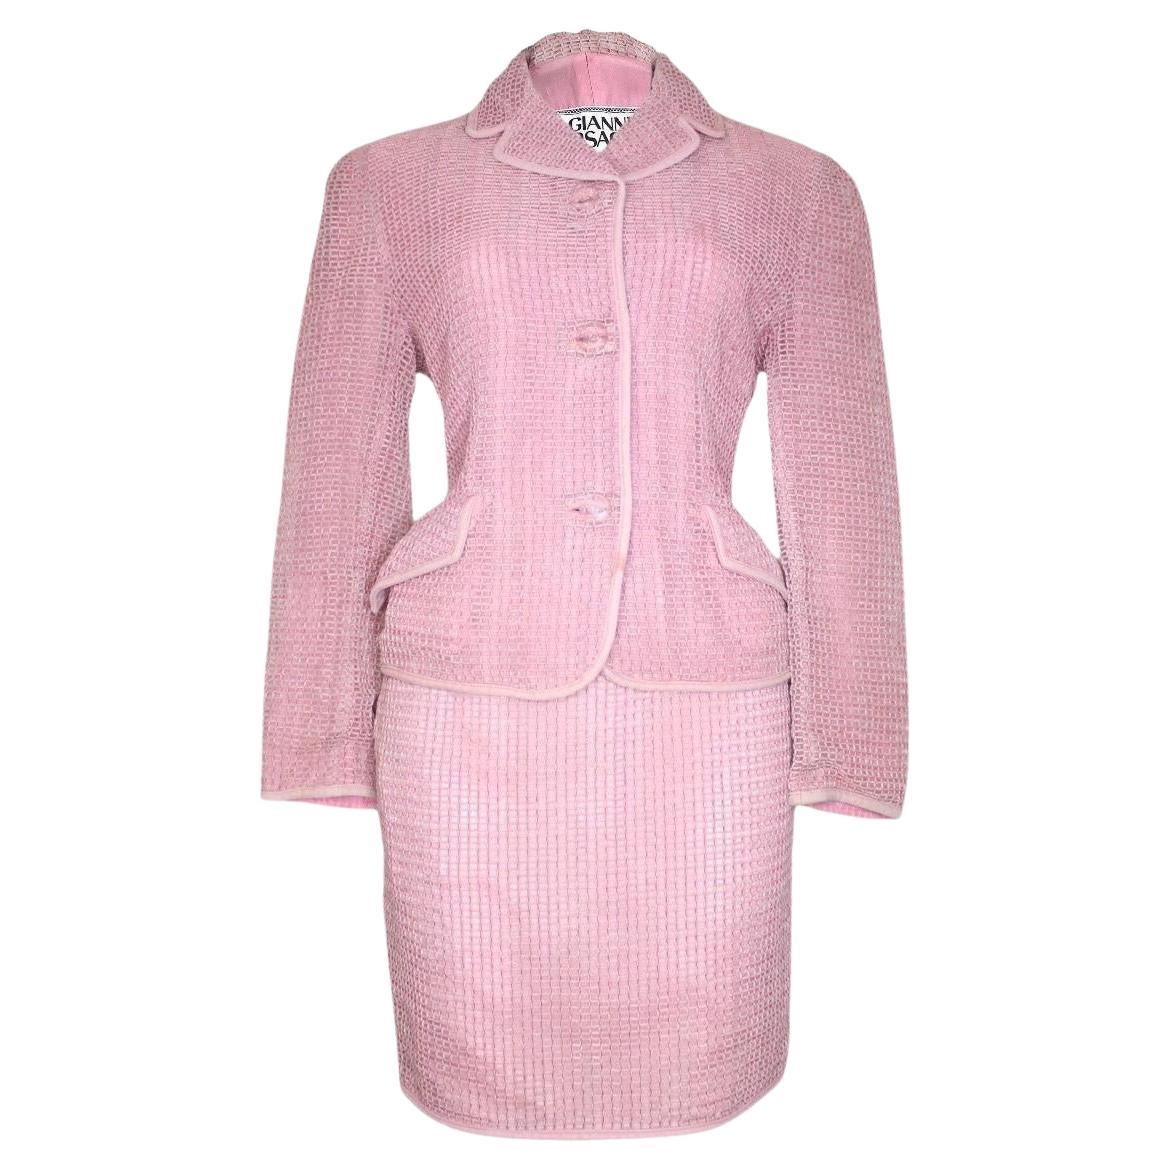 Gianni Versace Suit   Pink Jacket Skirt Set 1990's For Sale